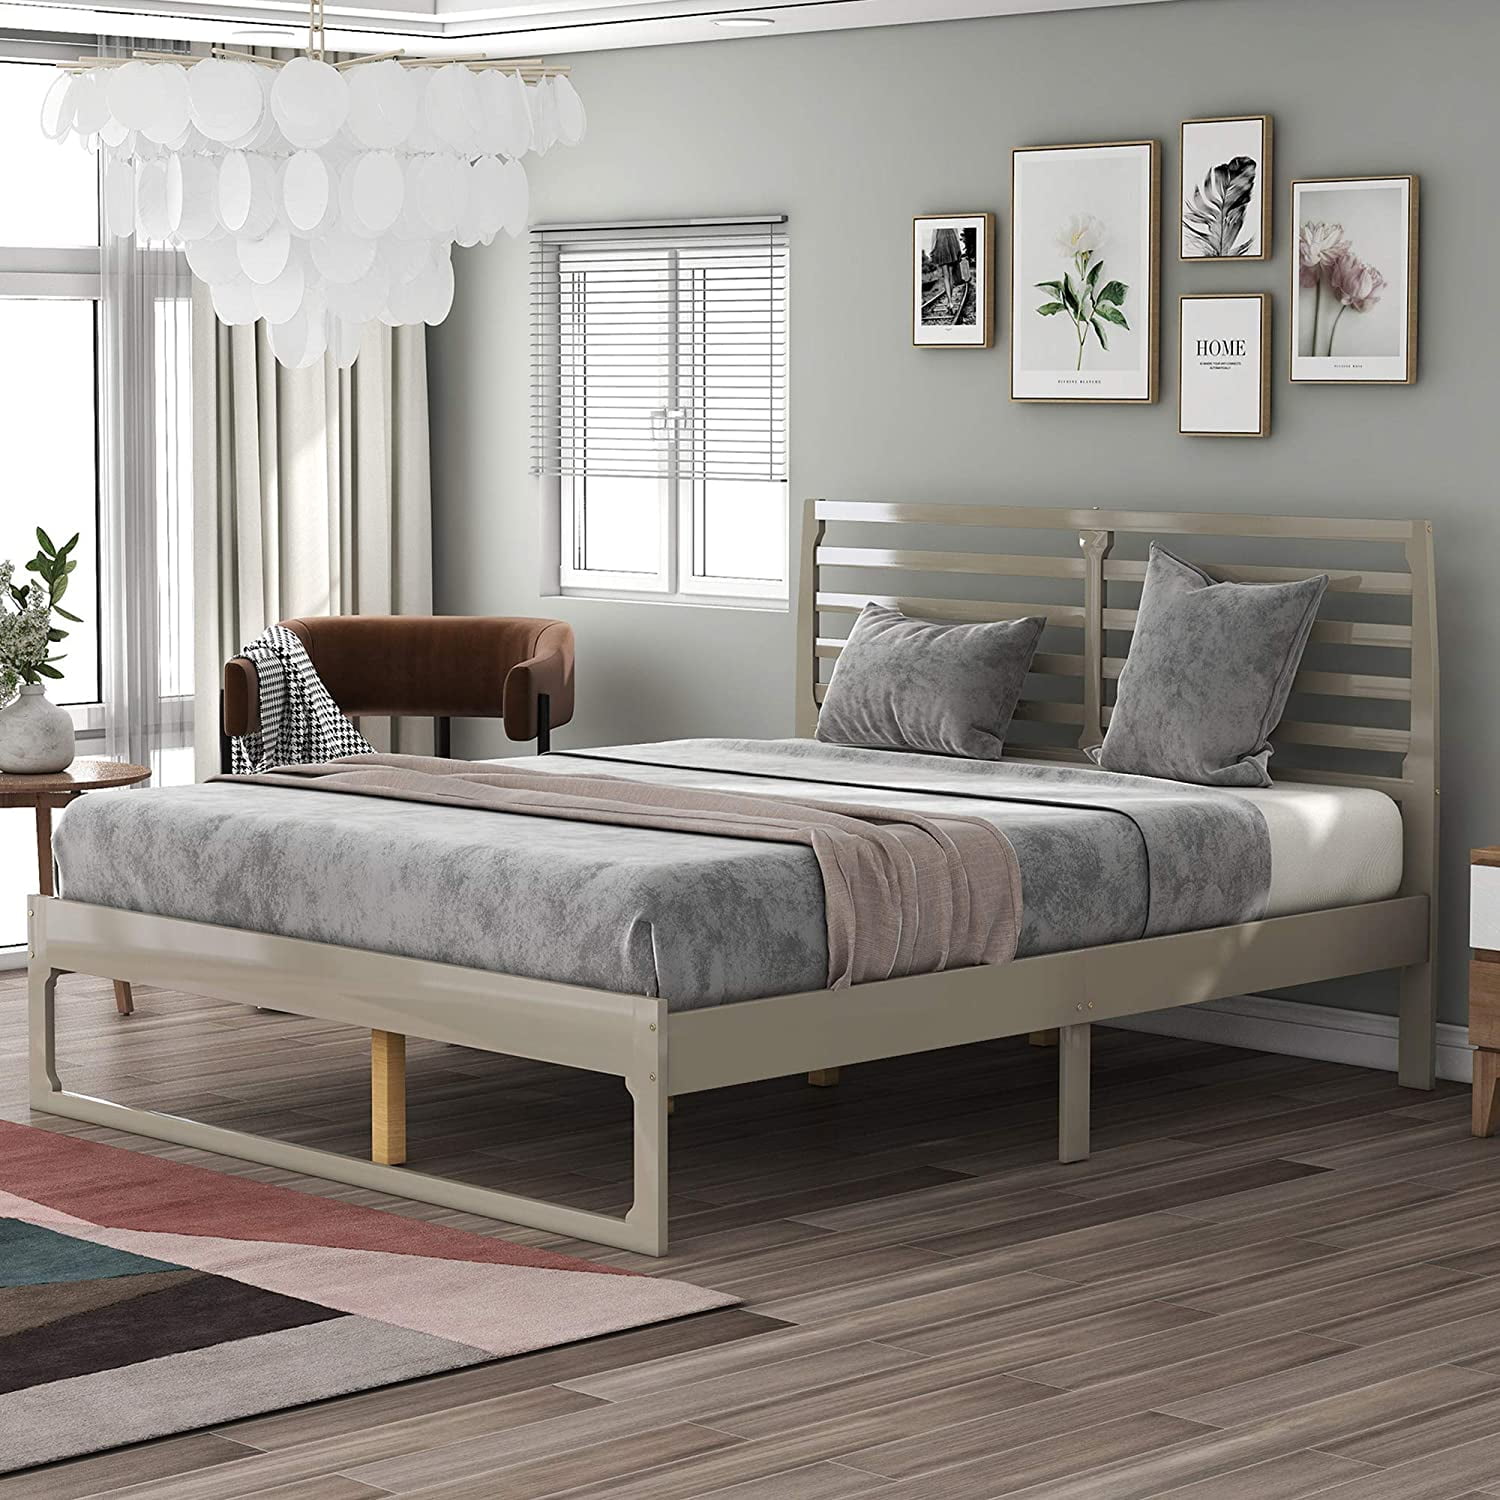 Wooden Bed Frame With Headboard, How To Assemble A Wooden Bed Frame